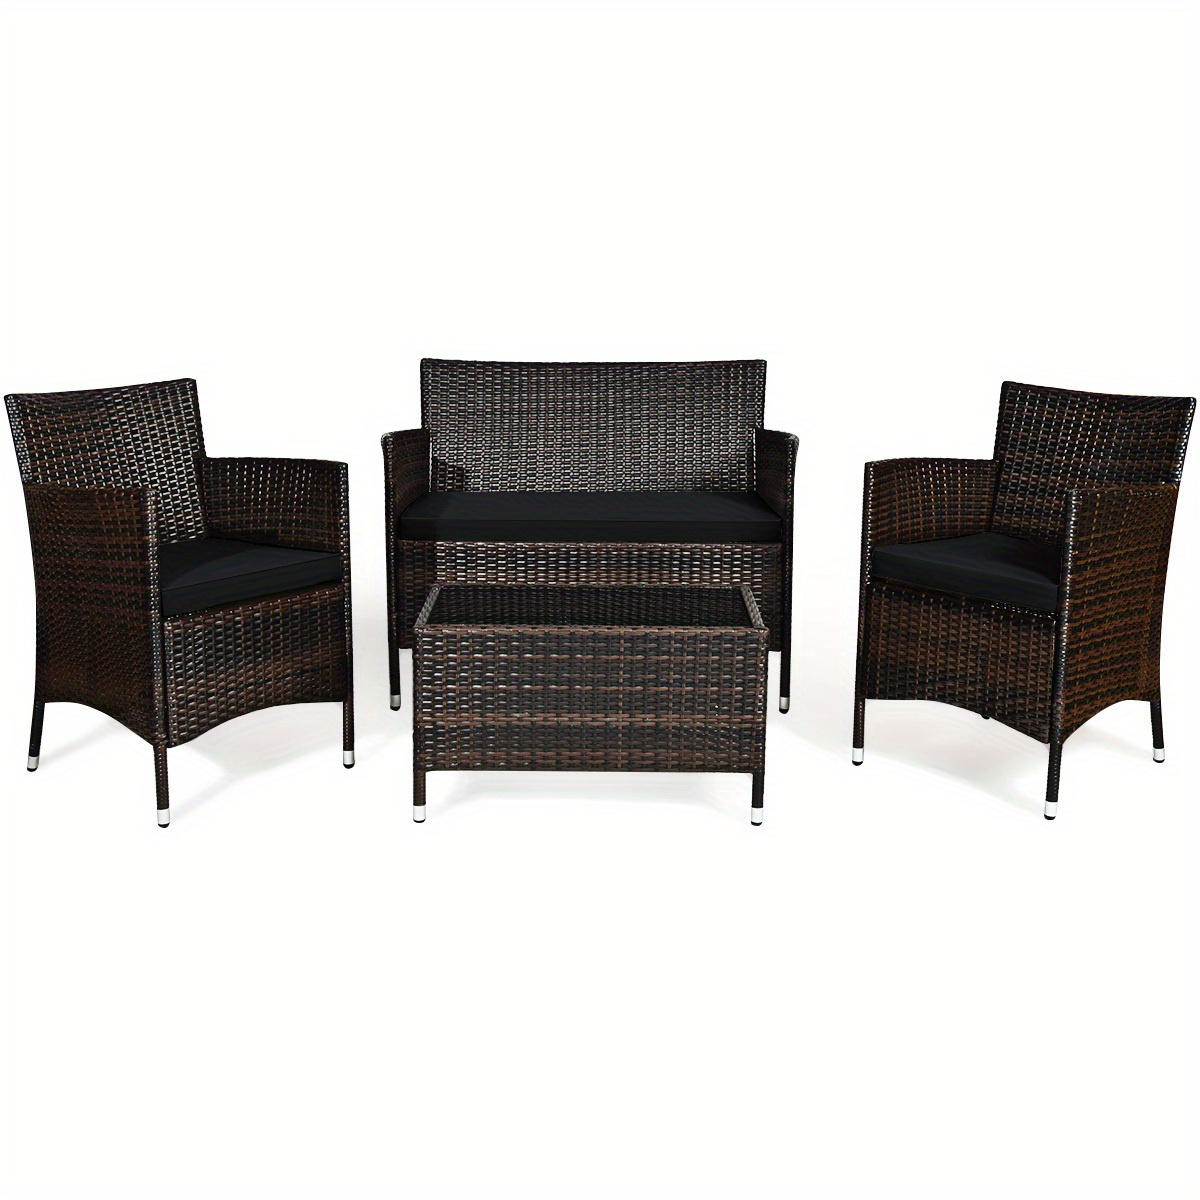 

4 Pieces Outdoor Patio Furniture Set, Pe Rattan Wicker Conversation Set With Tempered Glass Coffee Table And Cushions, Outdoor Sectional Sofa Set For Garden, Poolside And Backyard